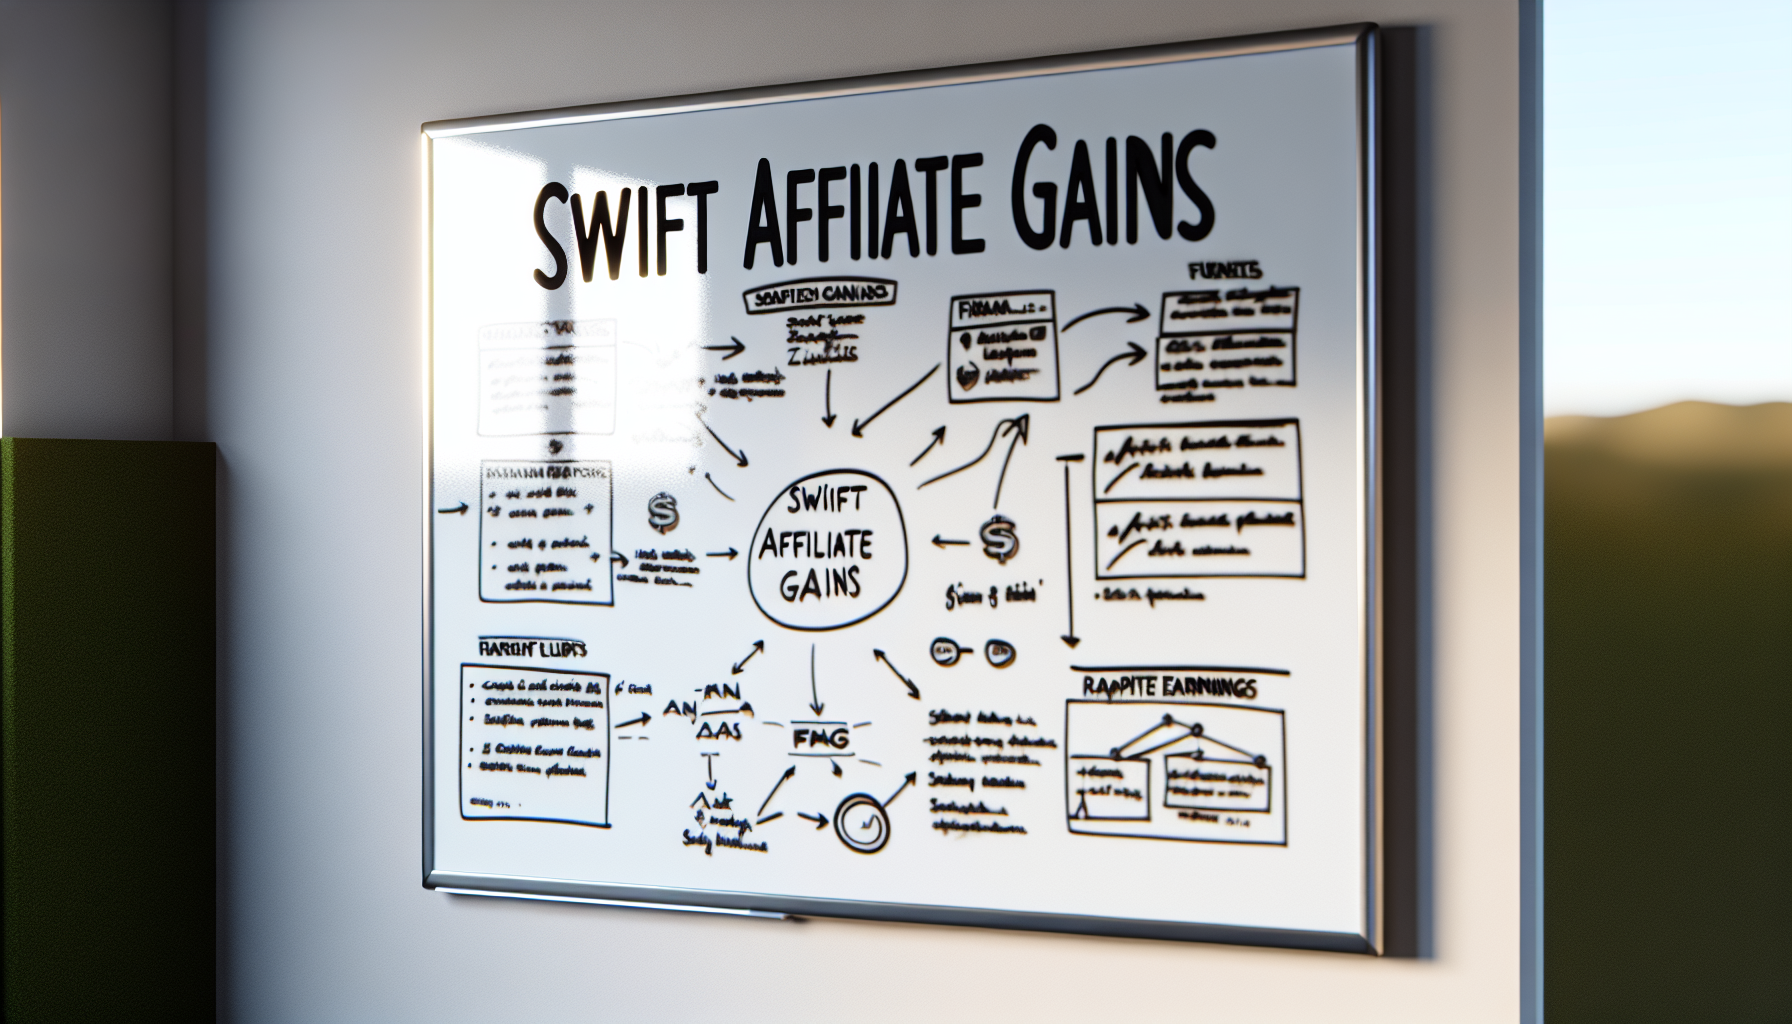 A strategic plan drawn on a whiteboard with 'swift affiliate gains' written on it